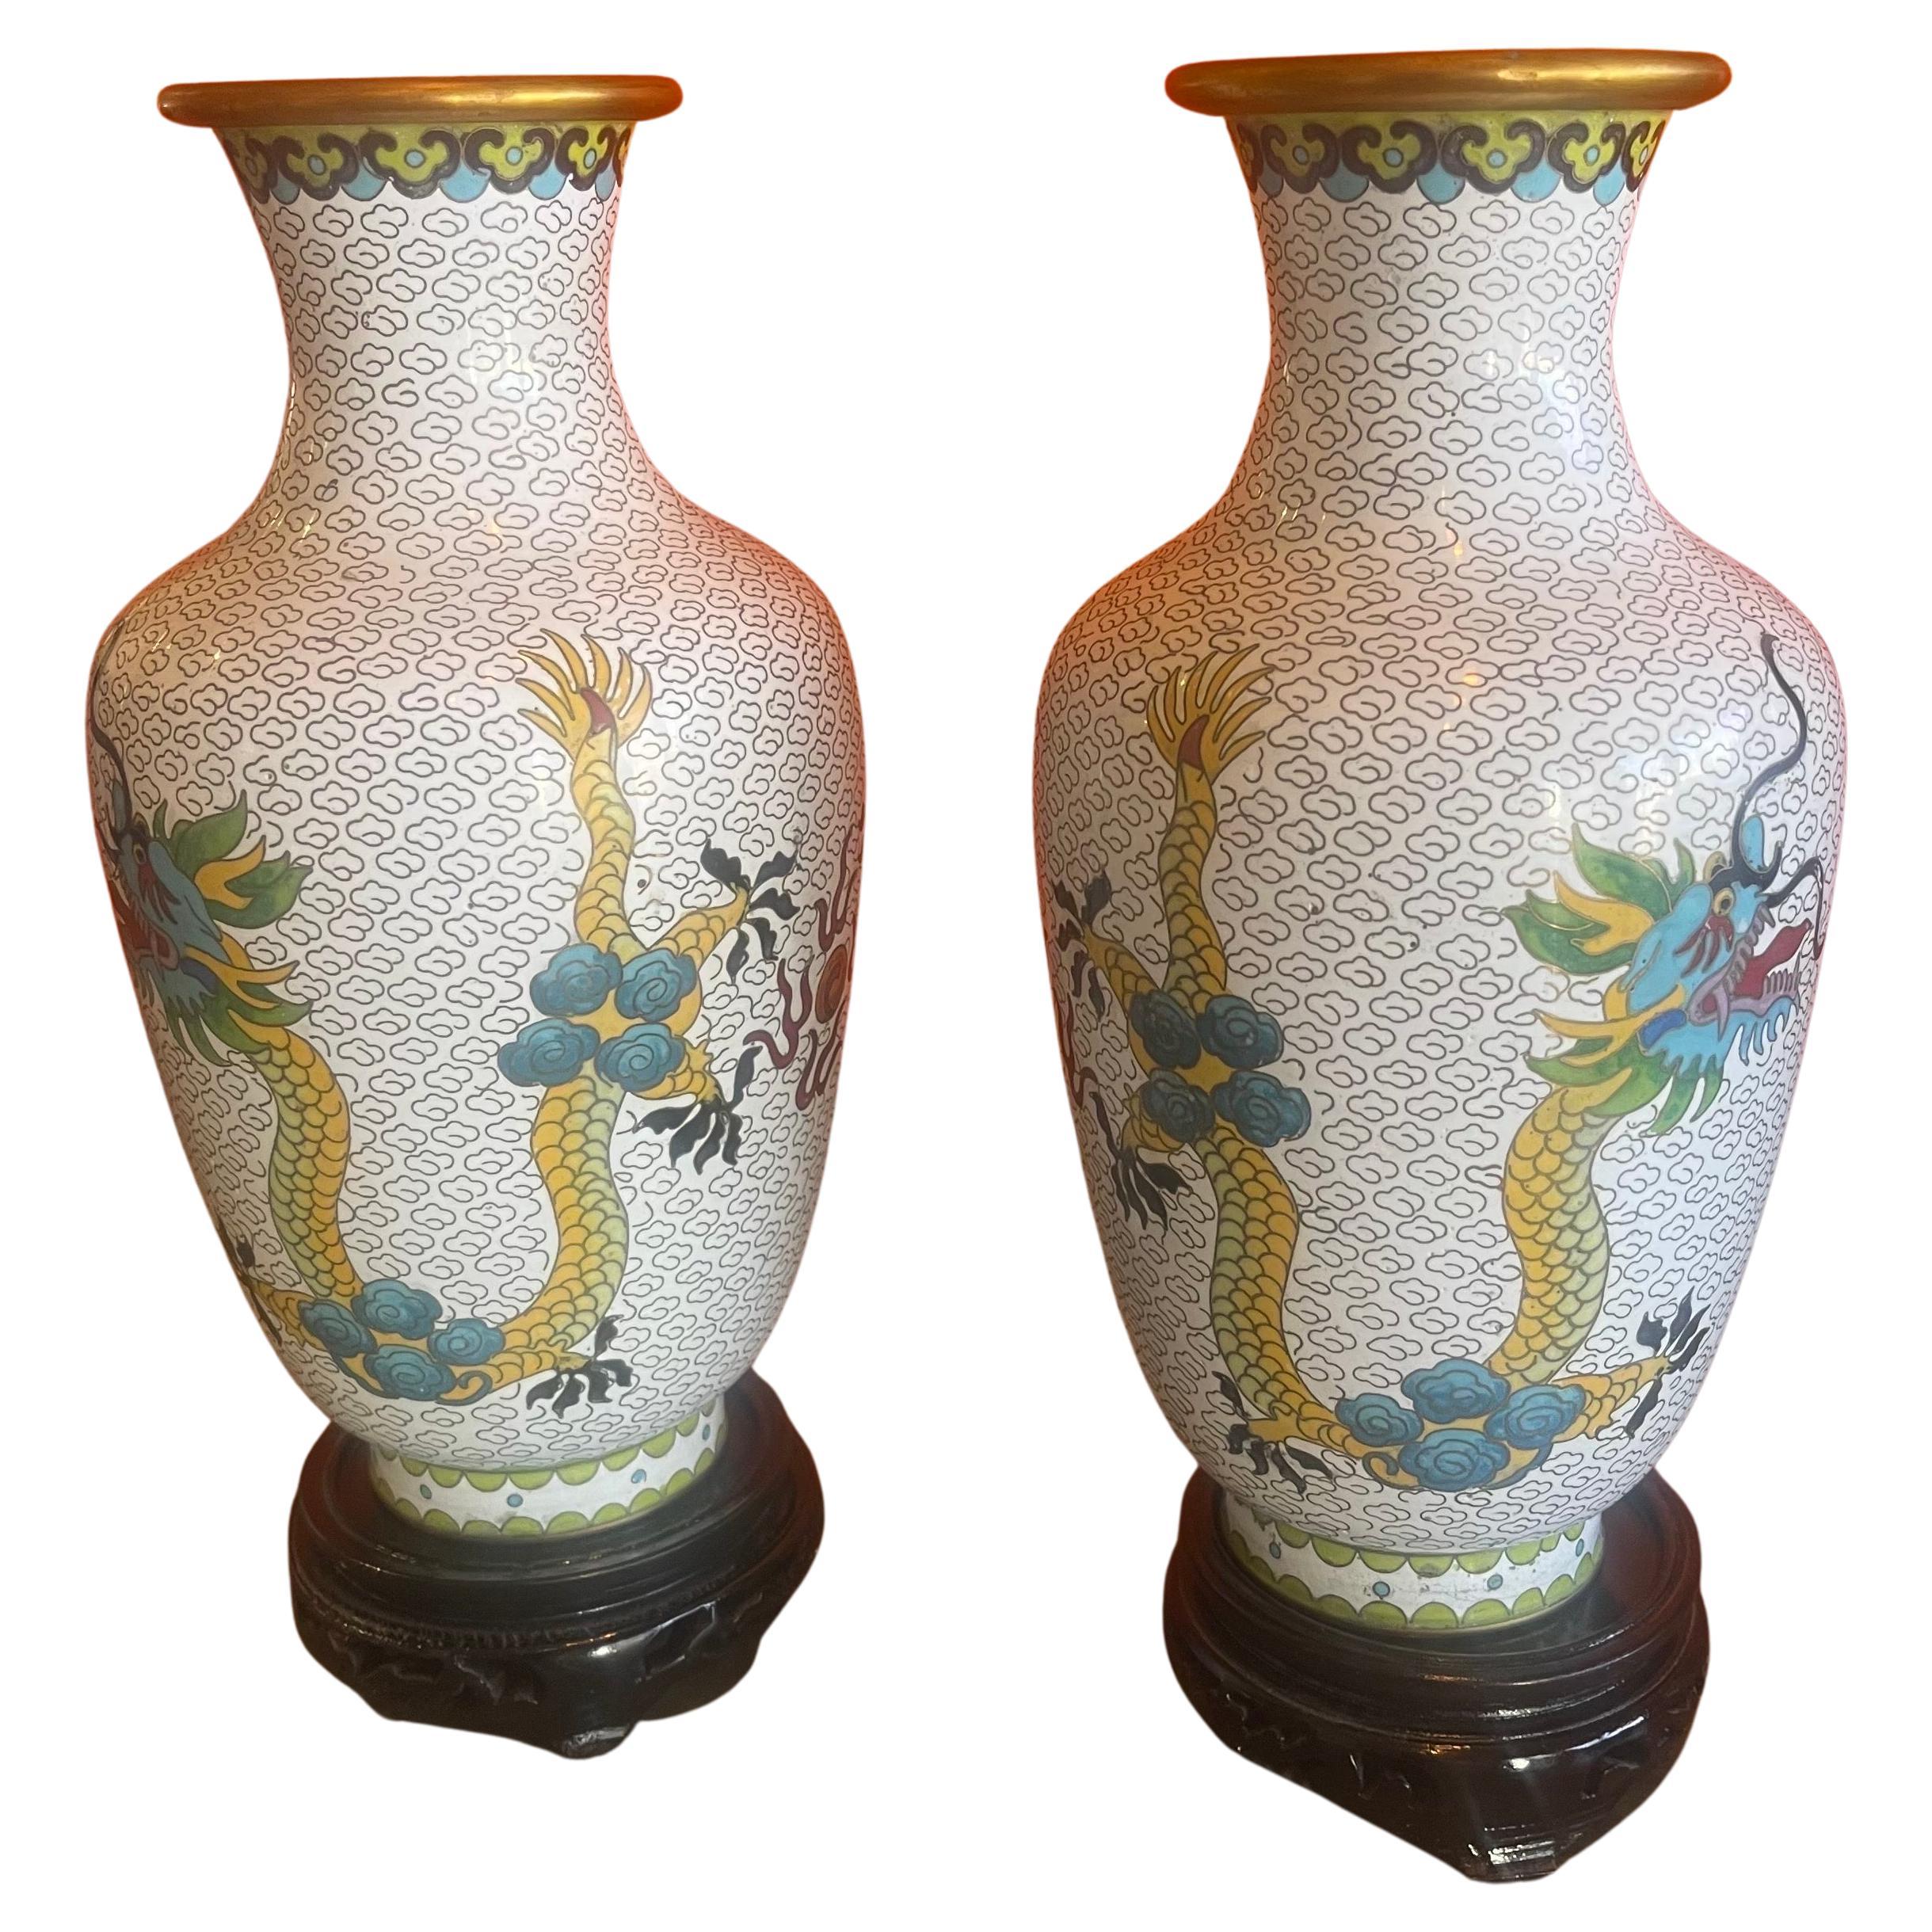 Mirrored Pair of Chinese Cloisonne Vases with Dragon Motif For Sale 7